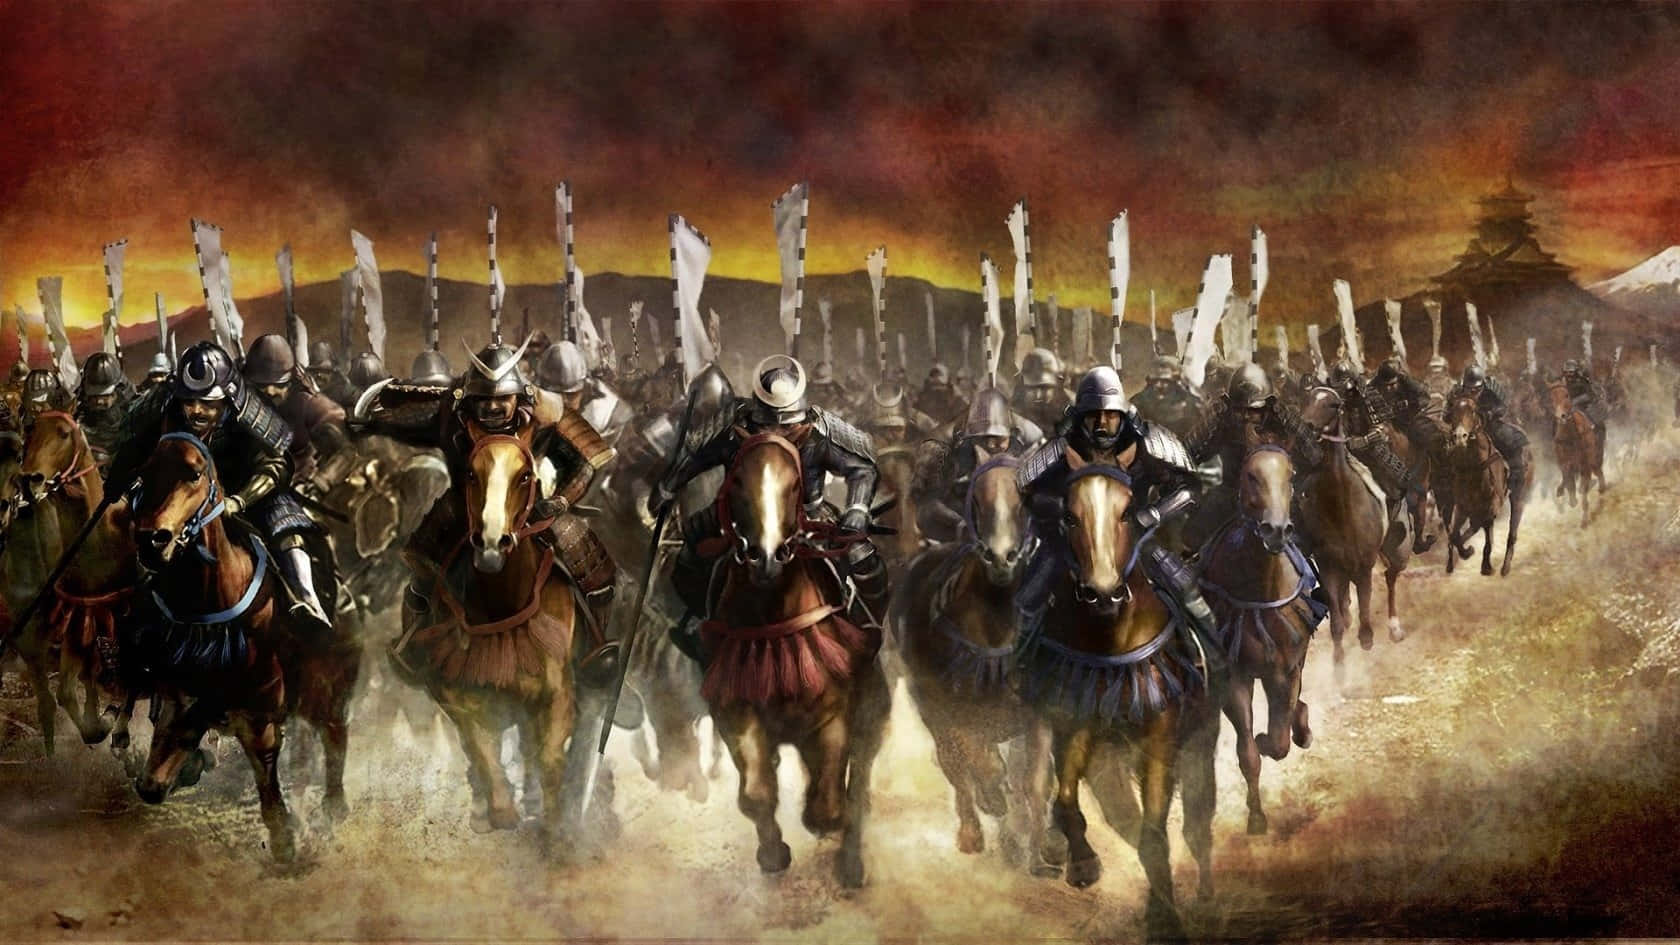 A Painting Of Men Riding Horses In A Desert Wallpaper